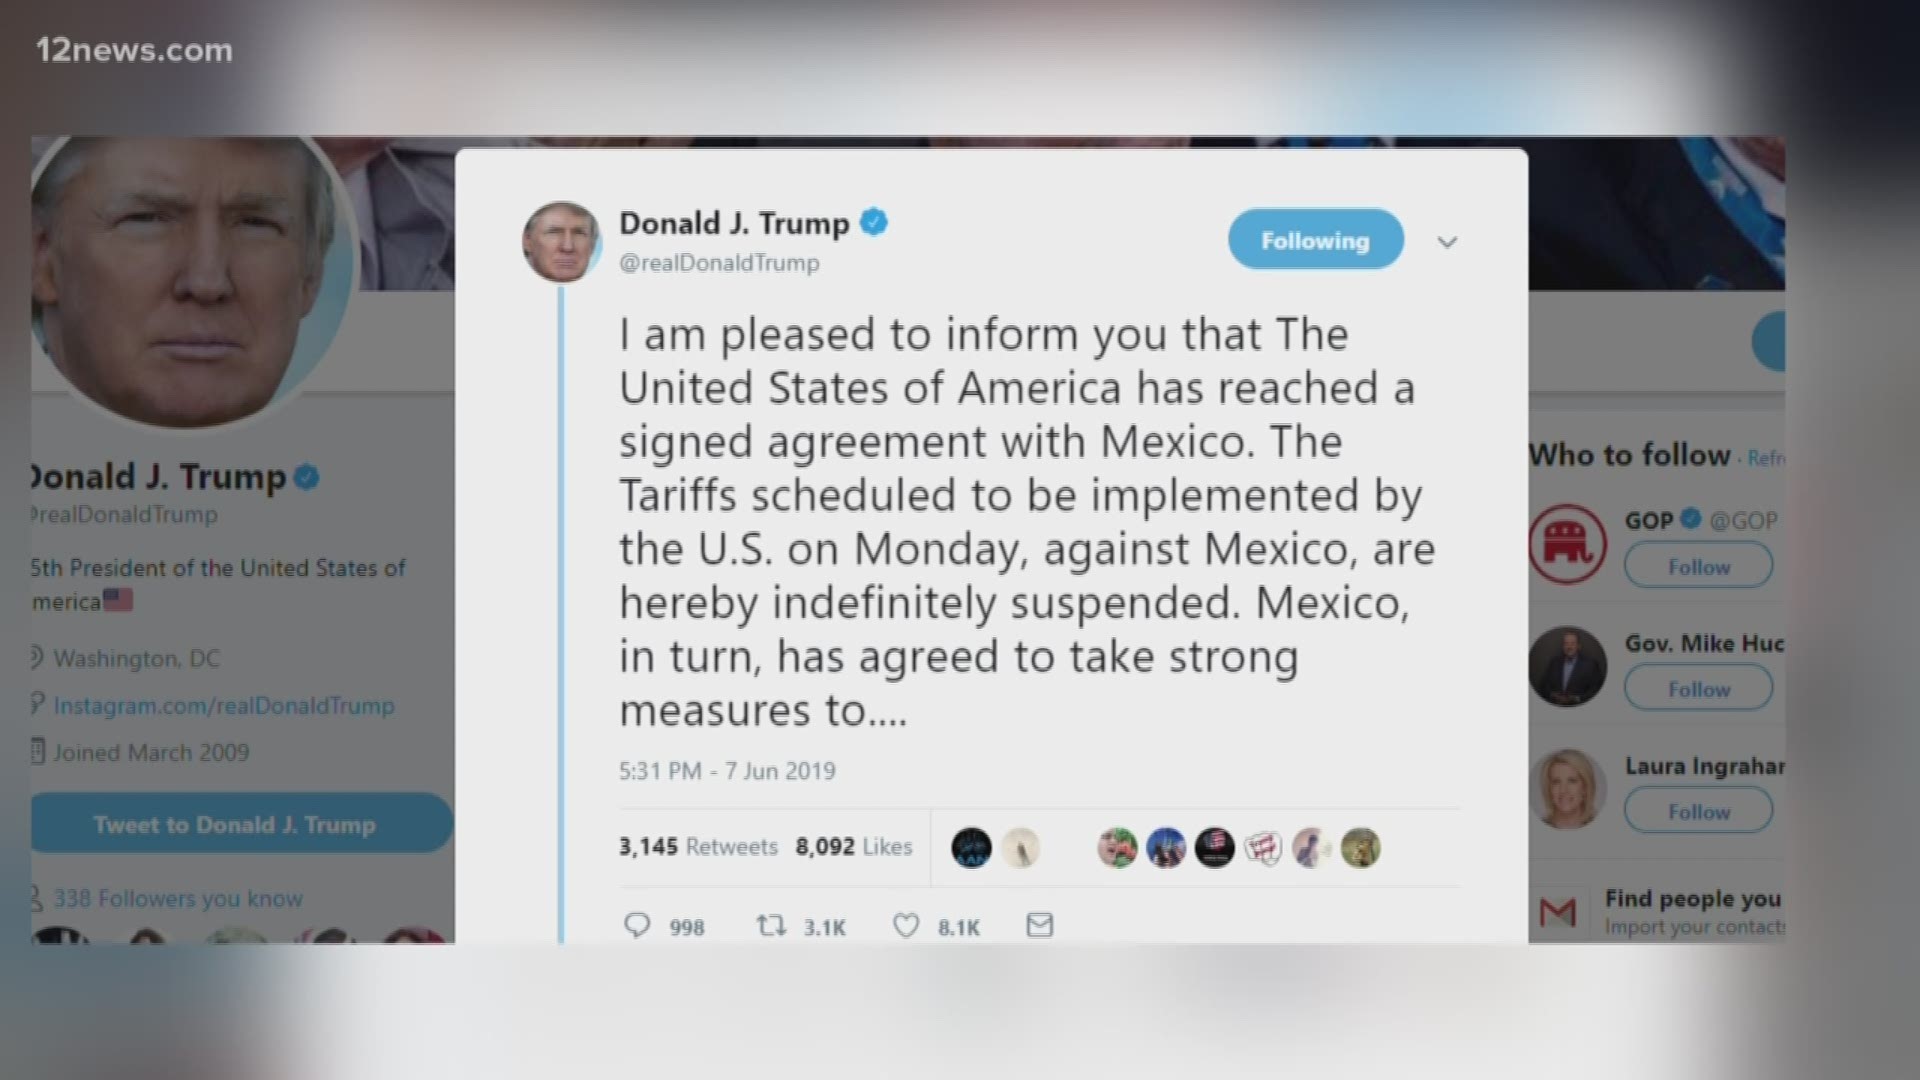 President Trump tweeted that the United States and Mexico have reached a trade agreement and the tariffs the President threatened to implement on Mexico are suspended indefinitely.